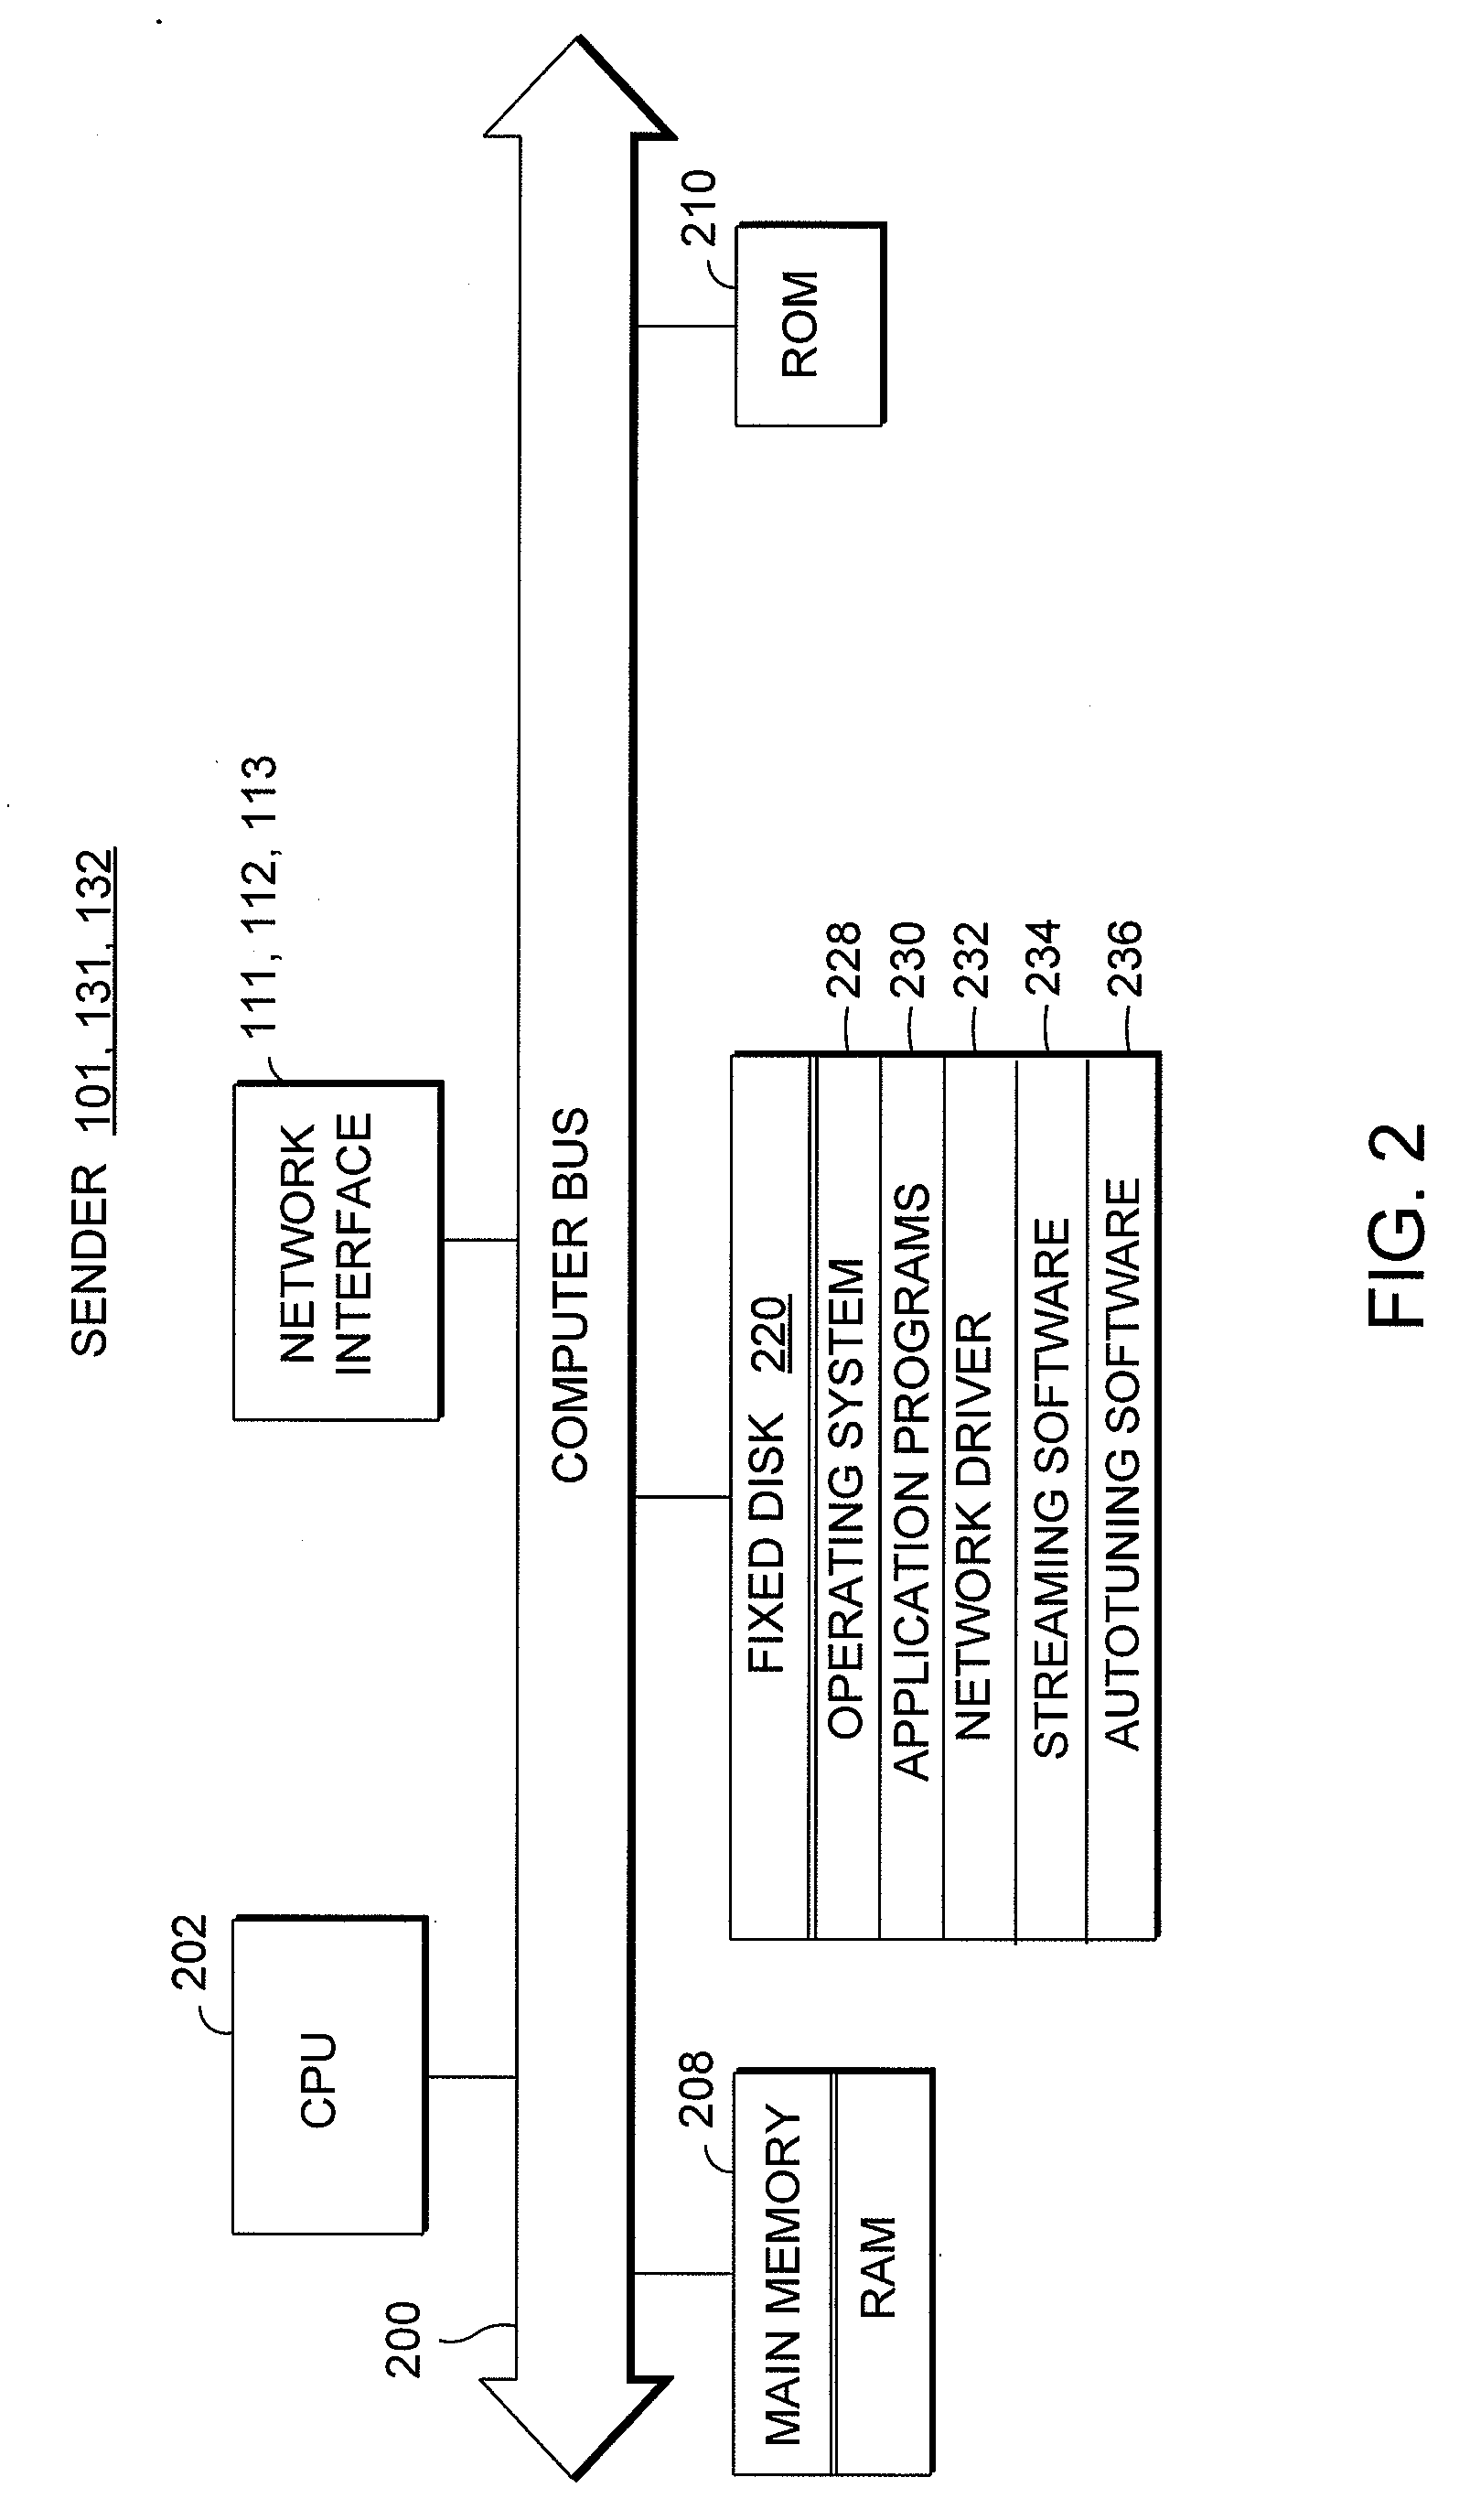 Mechanism for autotuning mass data transfer from a sender to a receiver over parallel connections